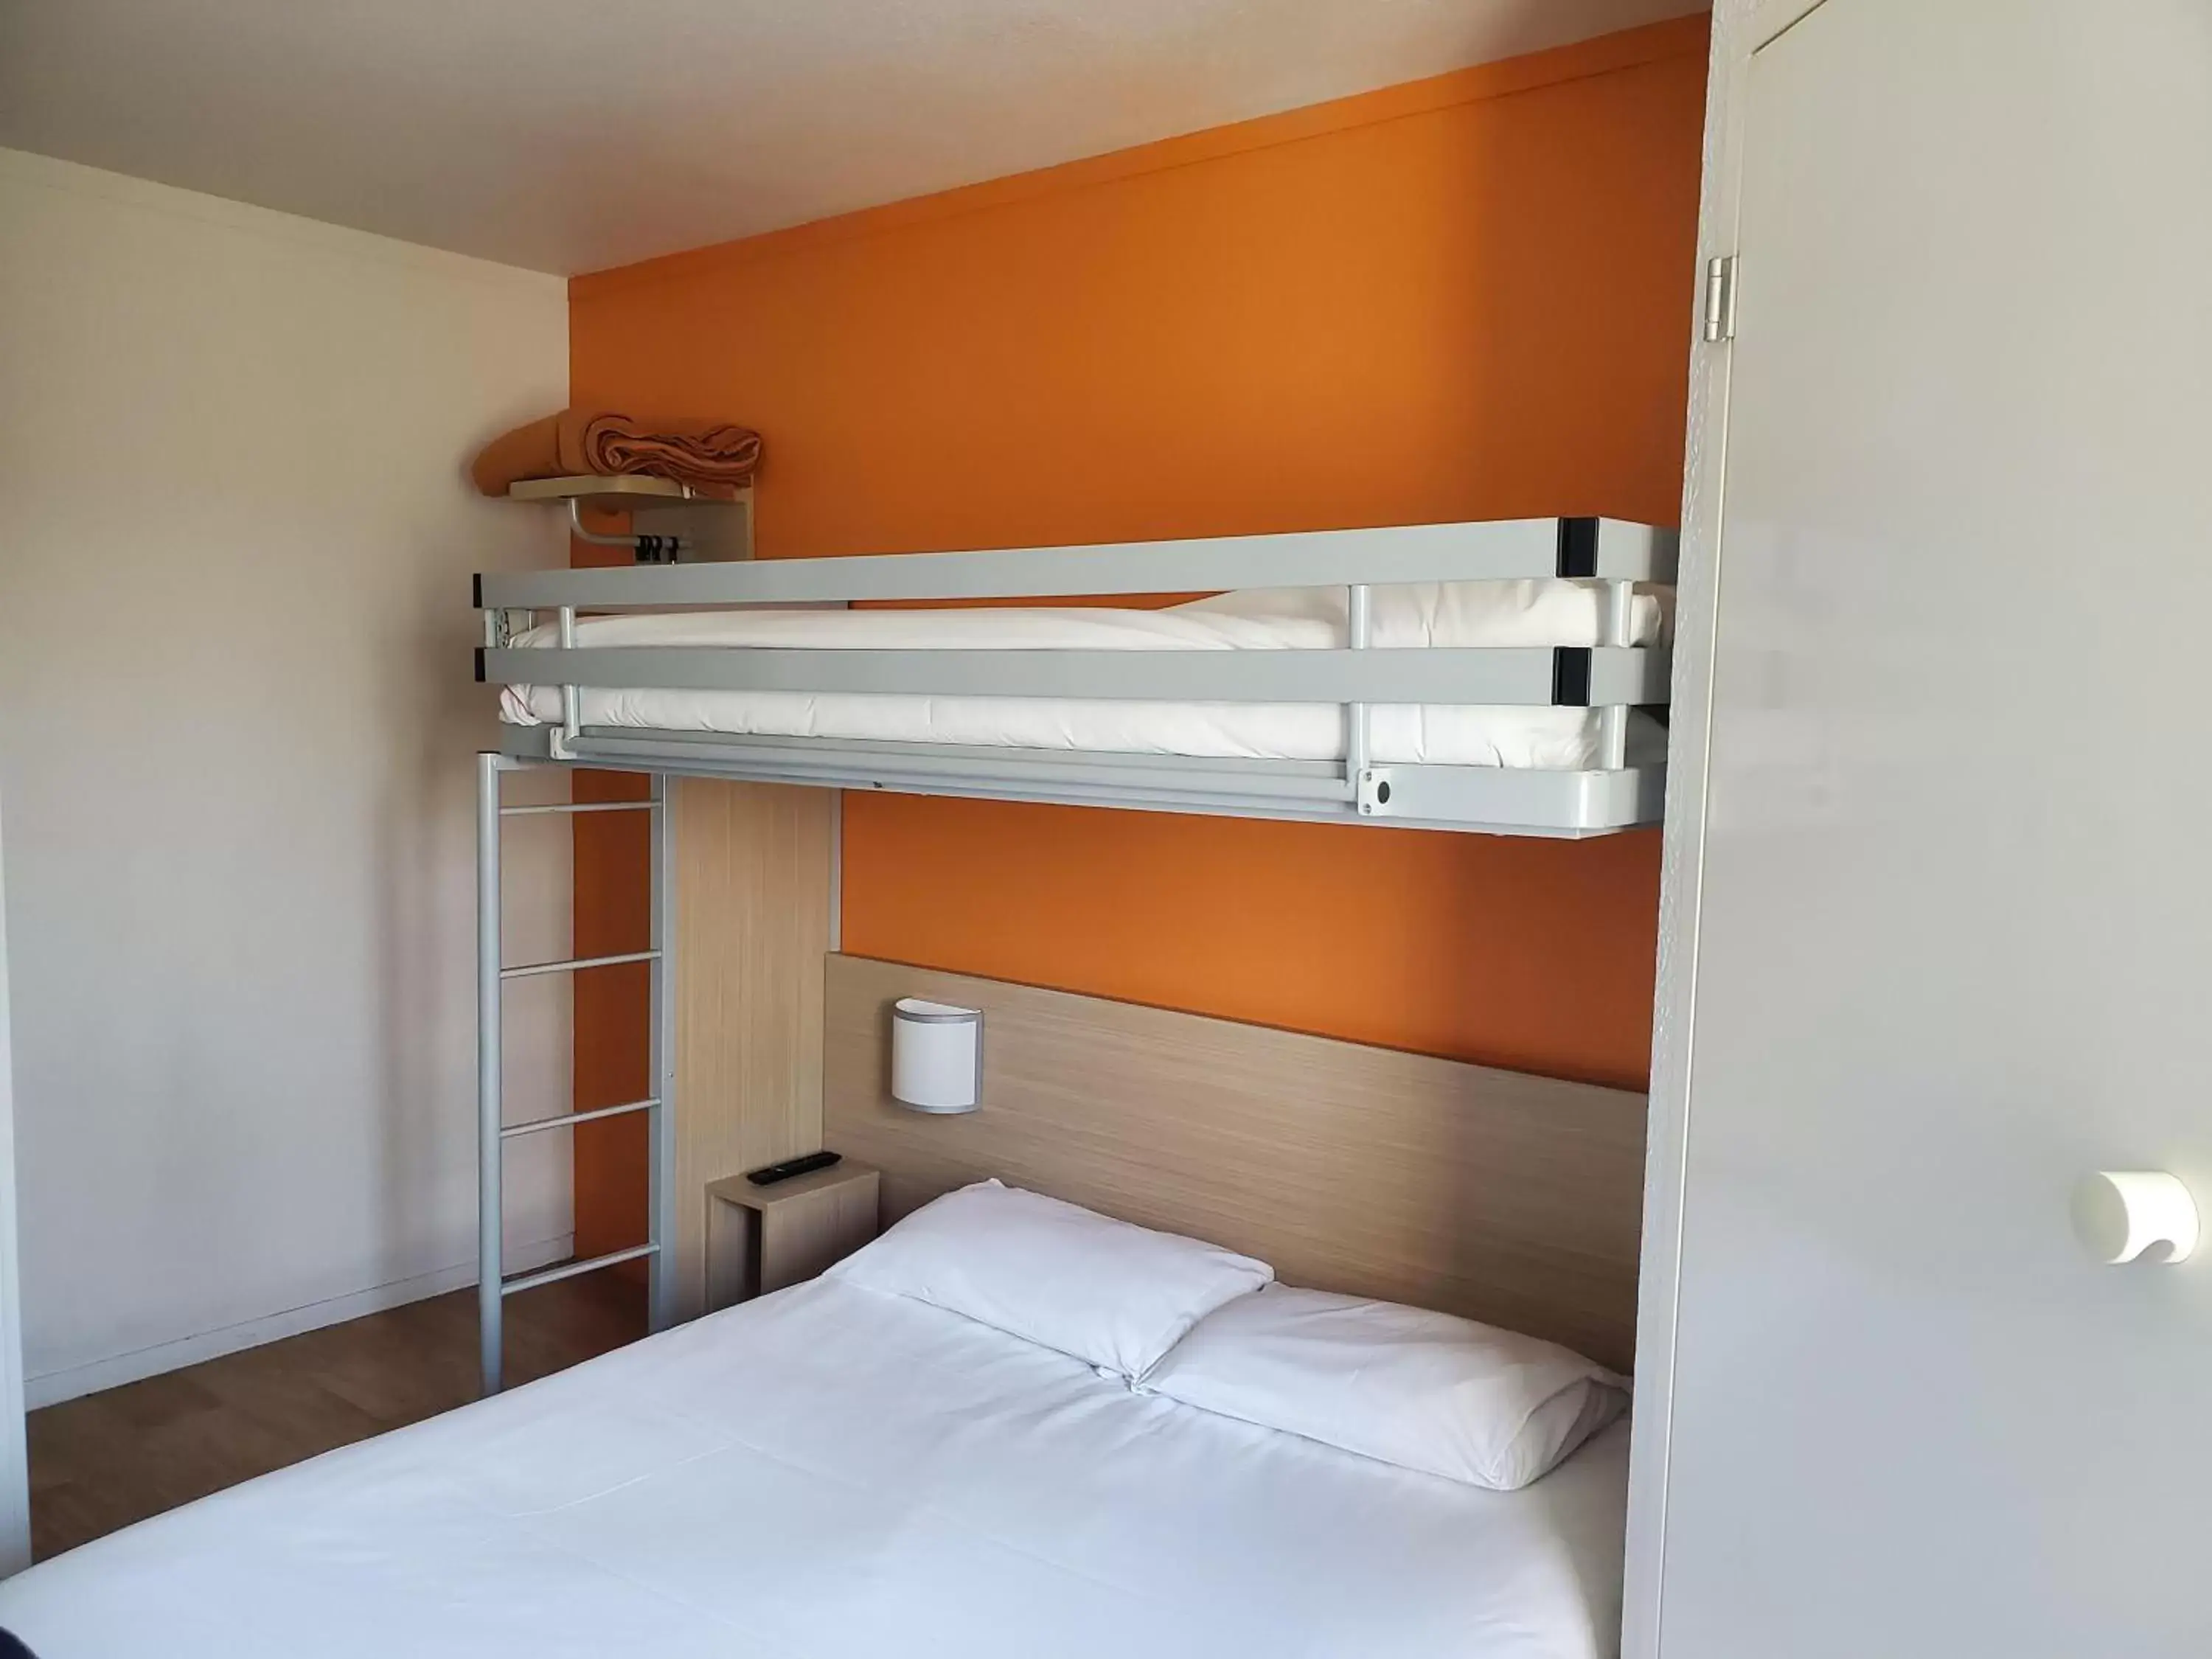 Bunk Bed in PREMIERE CLASSE ANGERS SUD Louvre Hotels group